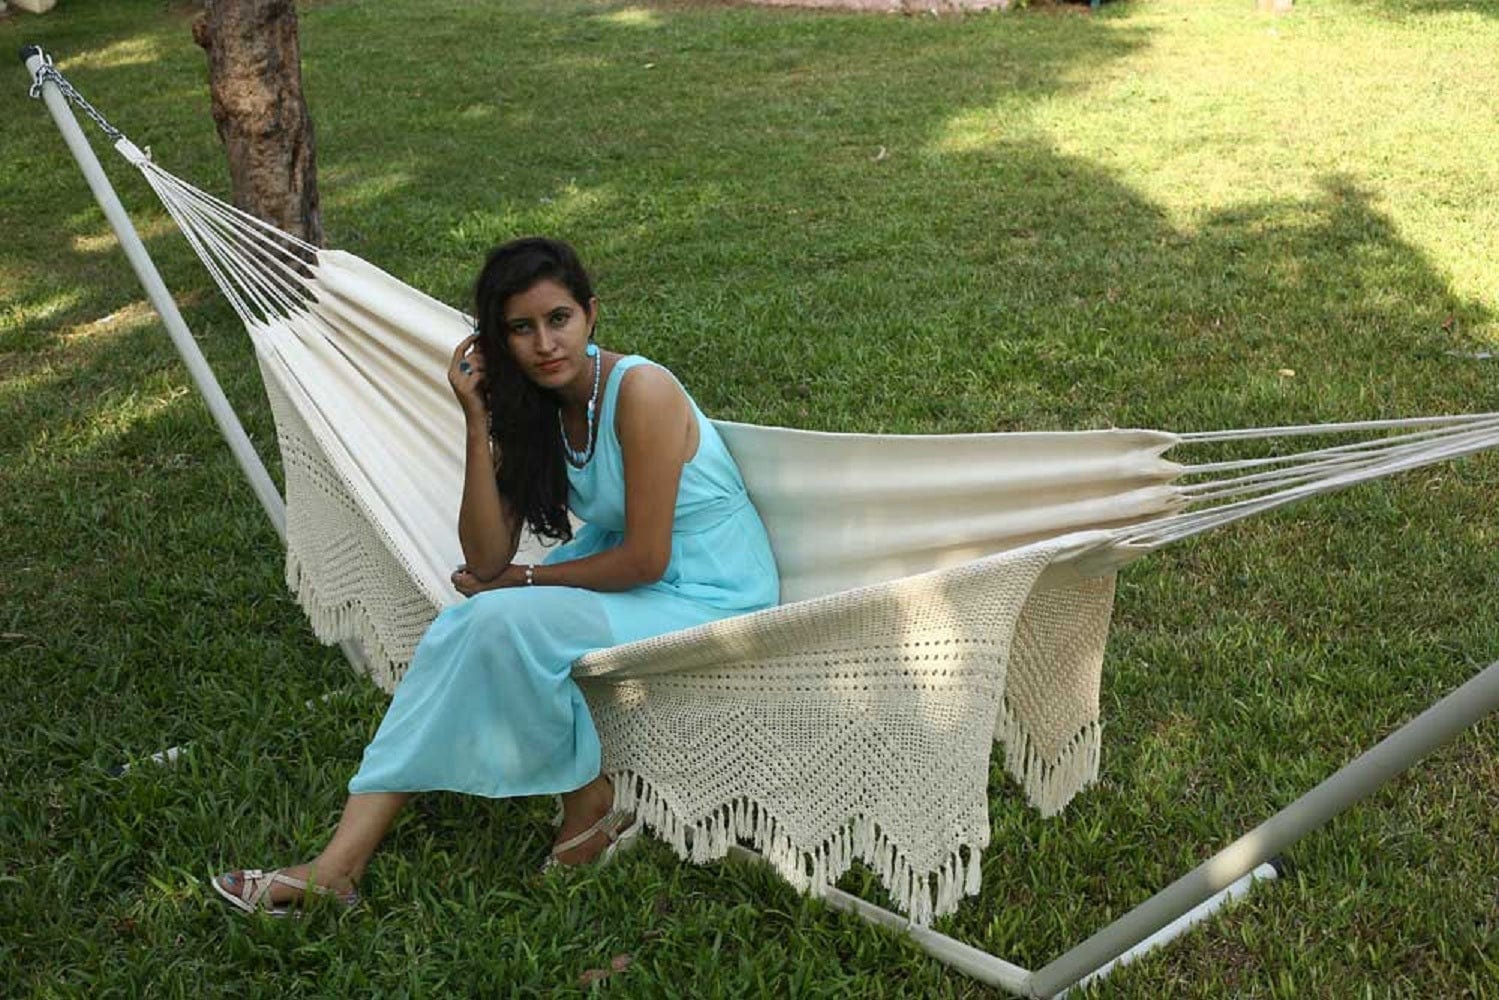 South American Natural Hammock With Decorative Crochet, Weight Capacity 180 kg- 150W X 396L cm